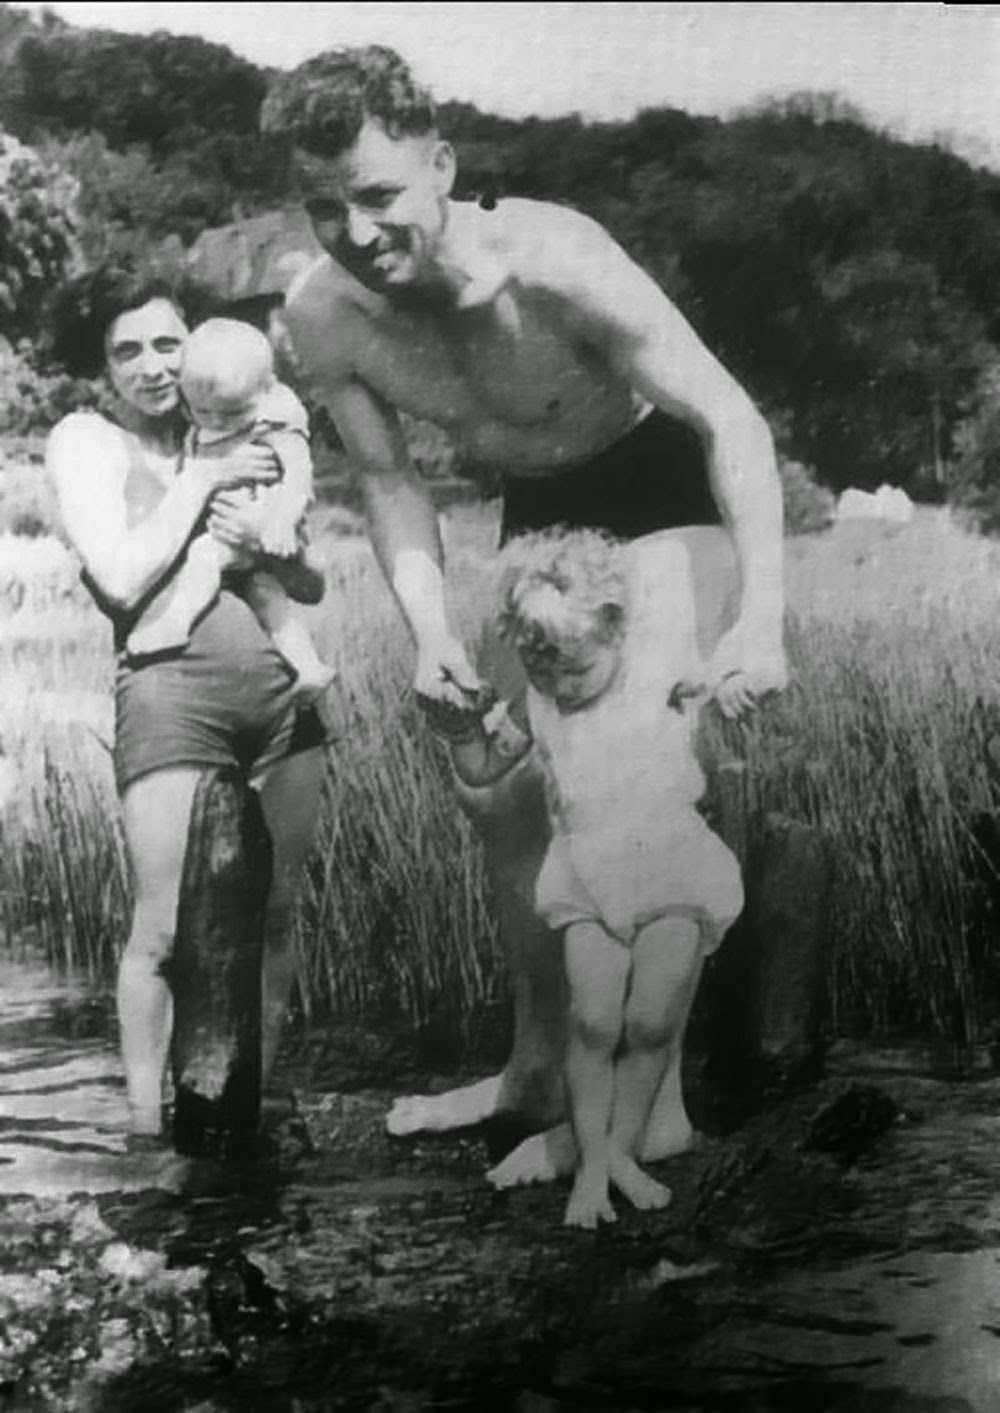 The first and only photo of the family, June 1938. Although it was forbidden for them to meet, they appeared together in public and put themselves at exceptional risk.